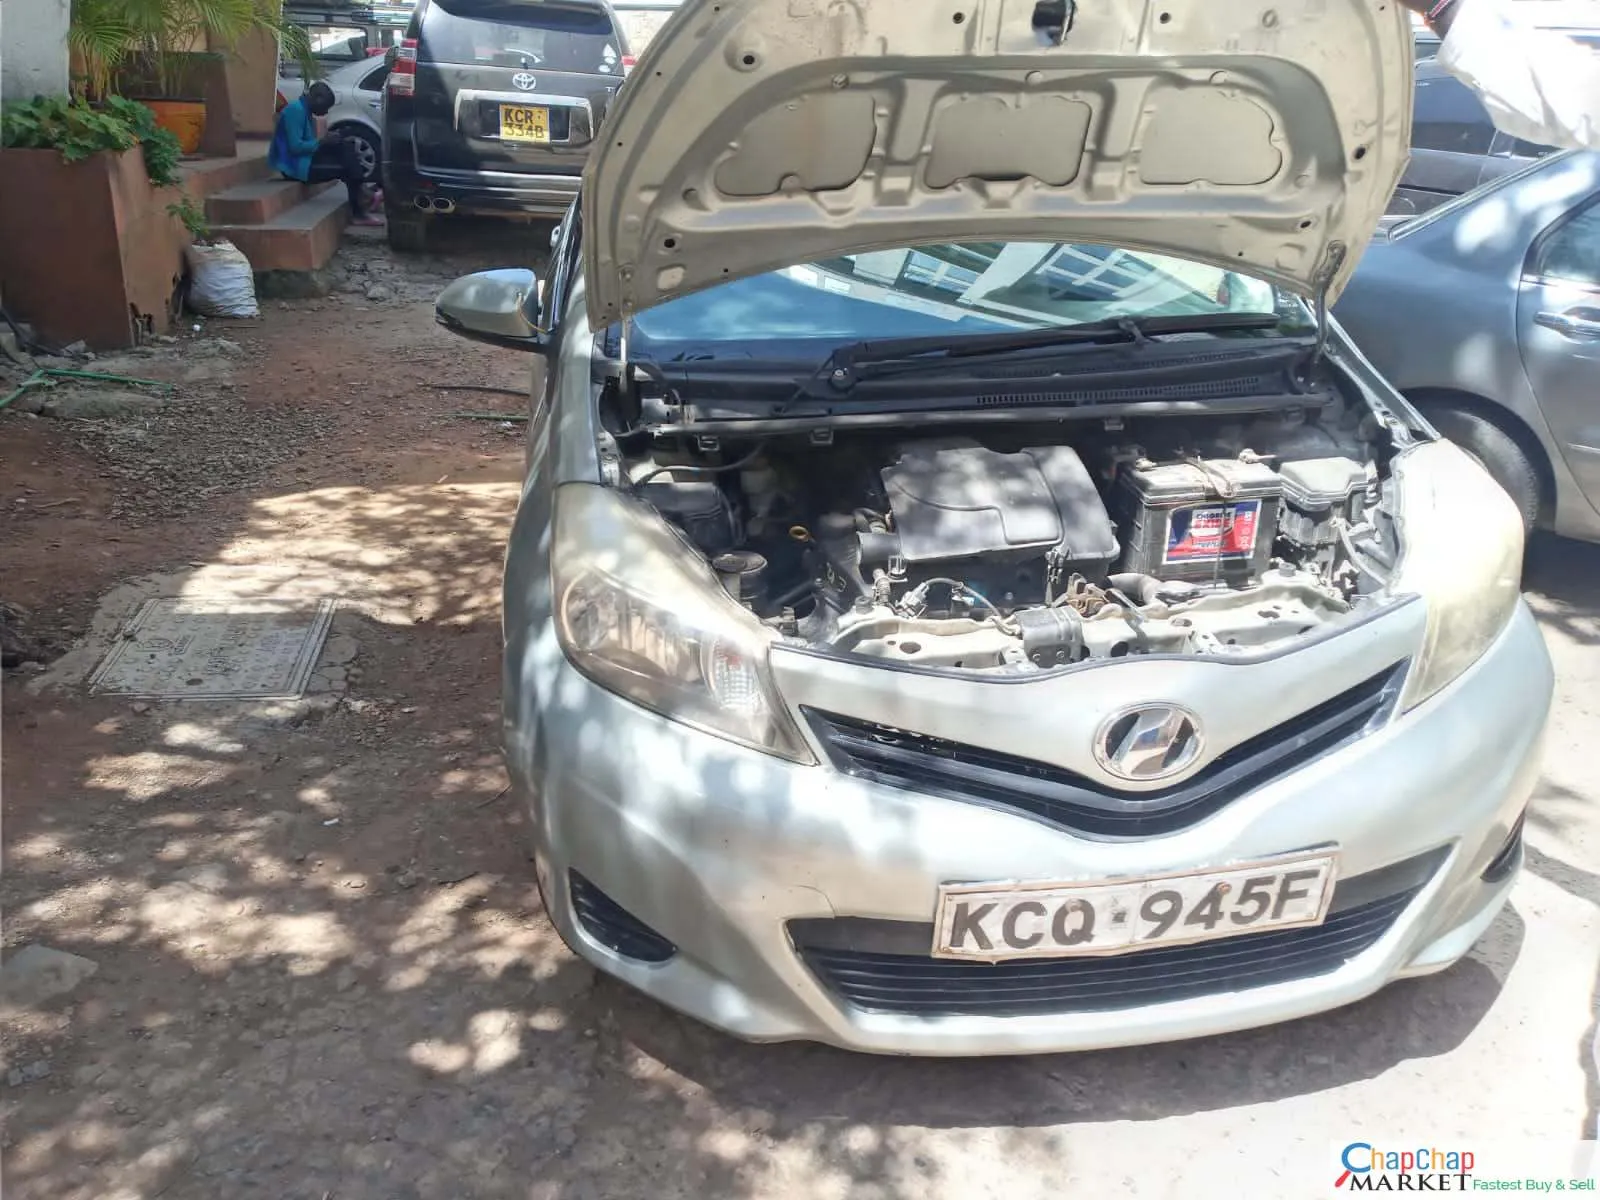 Toyota Vitz Asian Owner You PAY 30% Deposit INSTALLMENTS Trade in Ok New Hire purchase installments